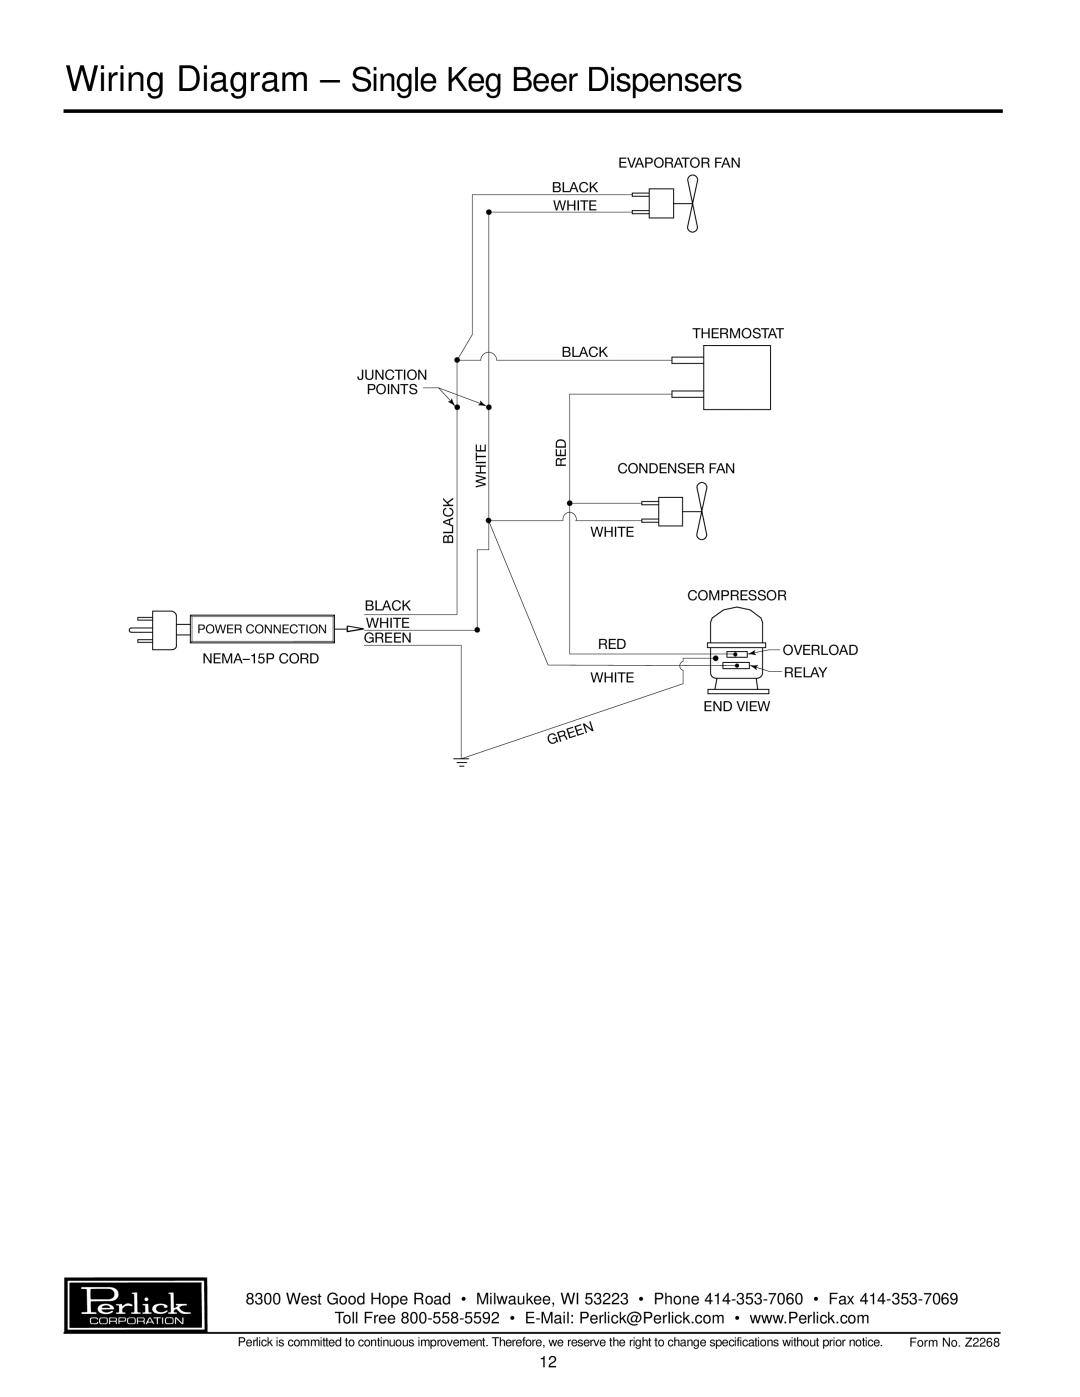 Perlick DP32S, DS32S specifications Wiring Diagram - Single Keg Beer Dispensers, Overload 